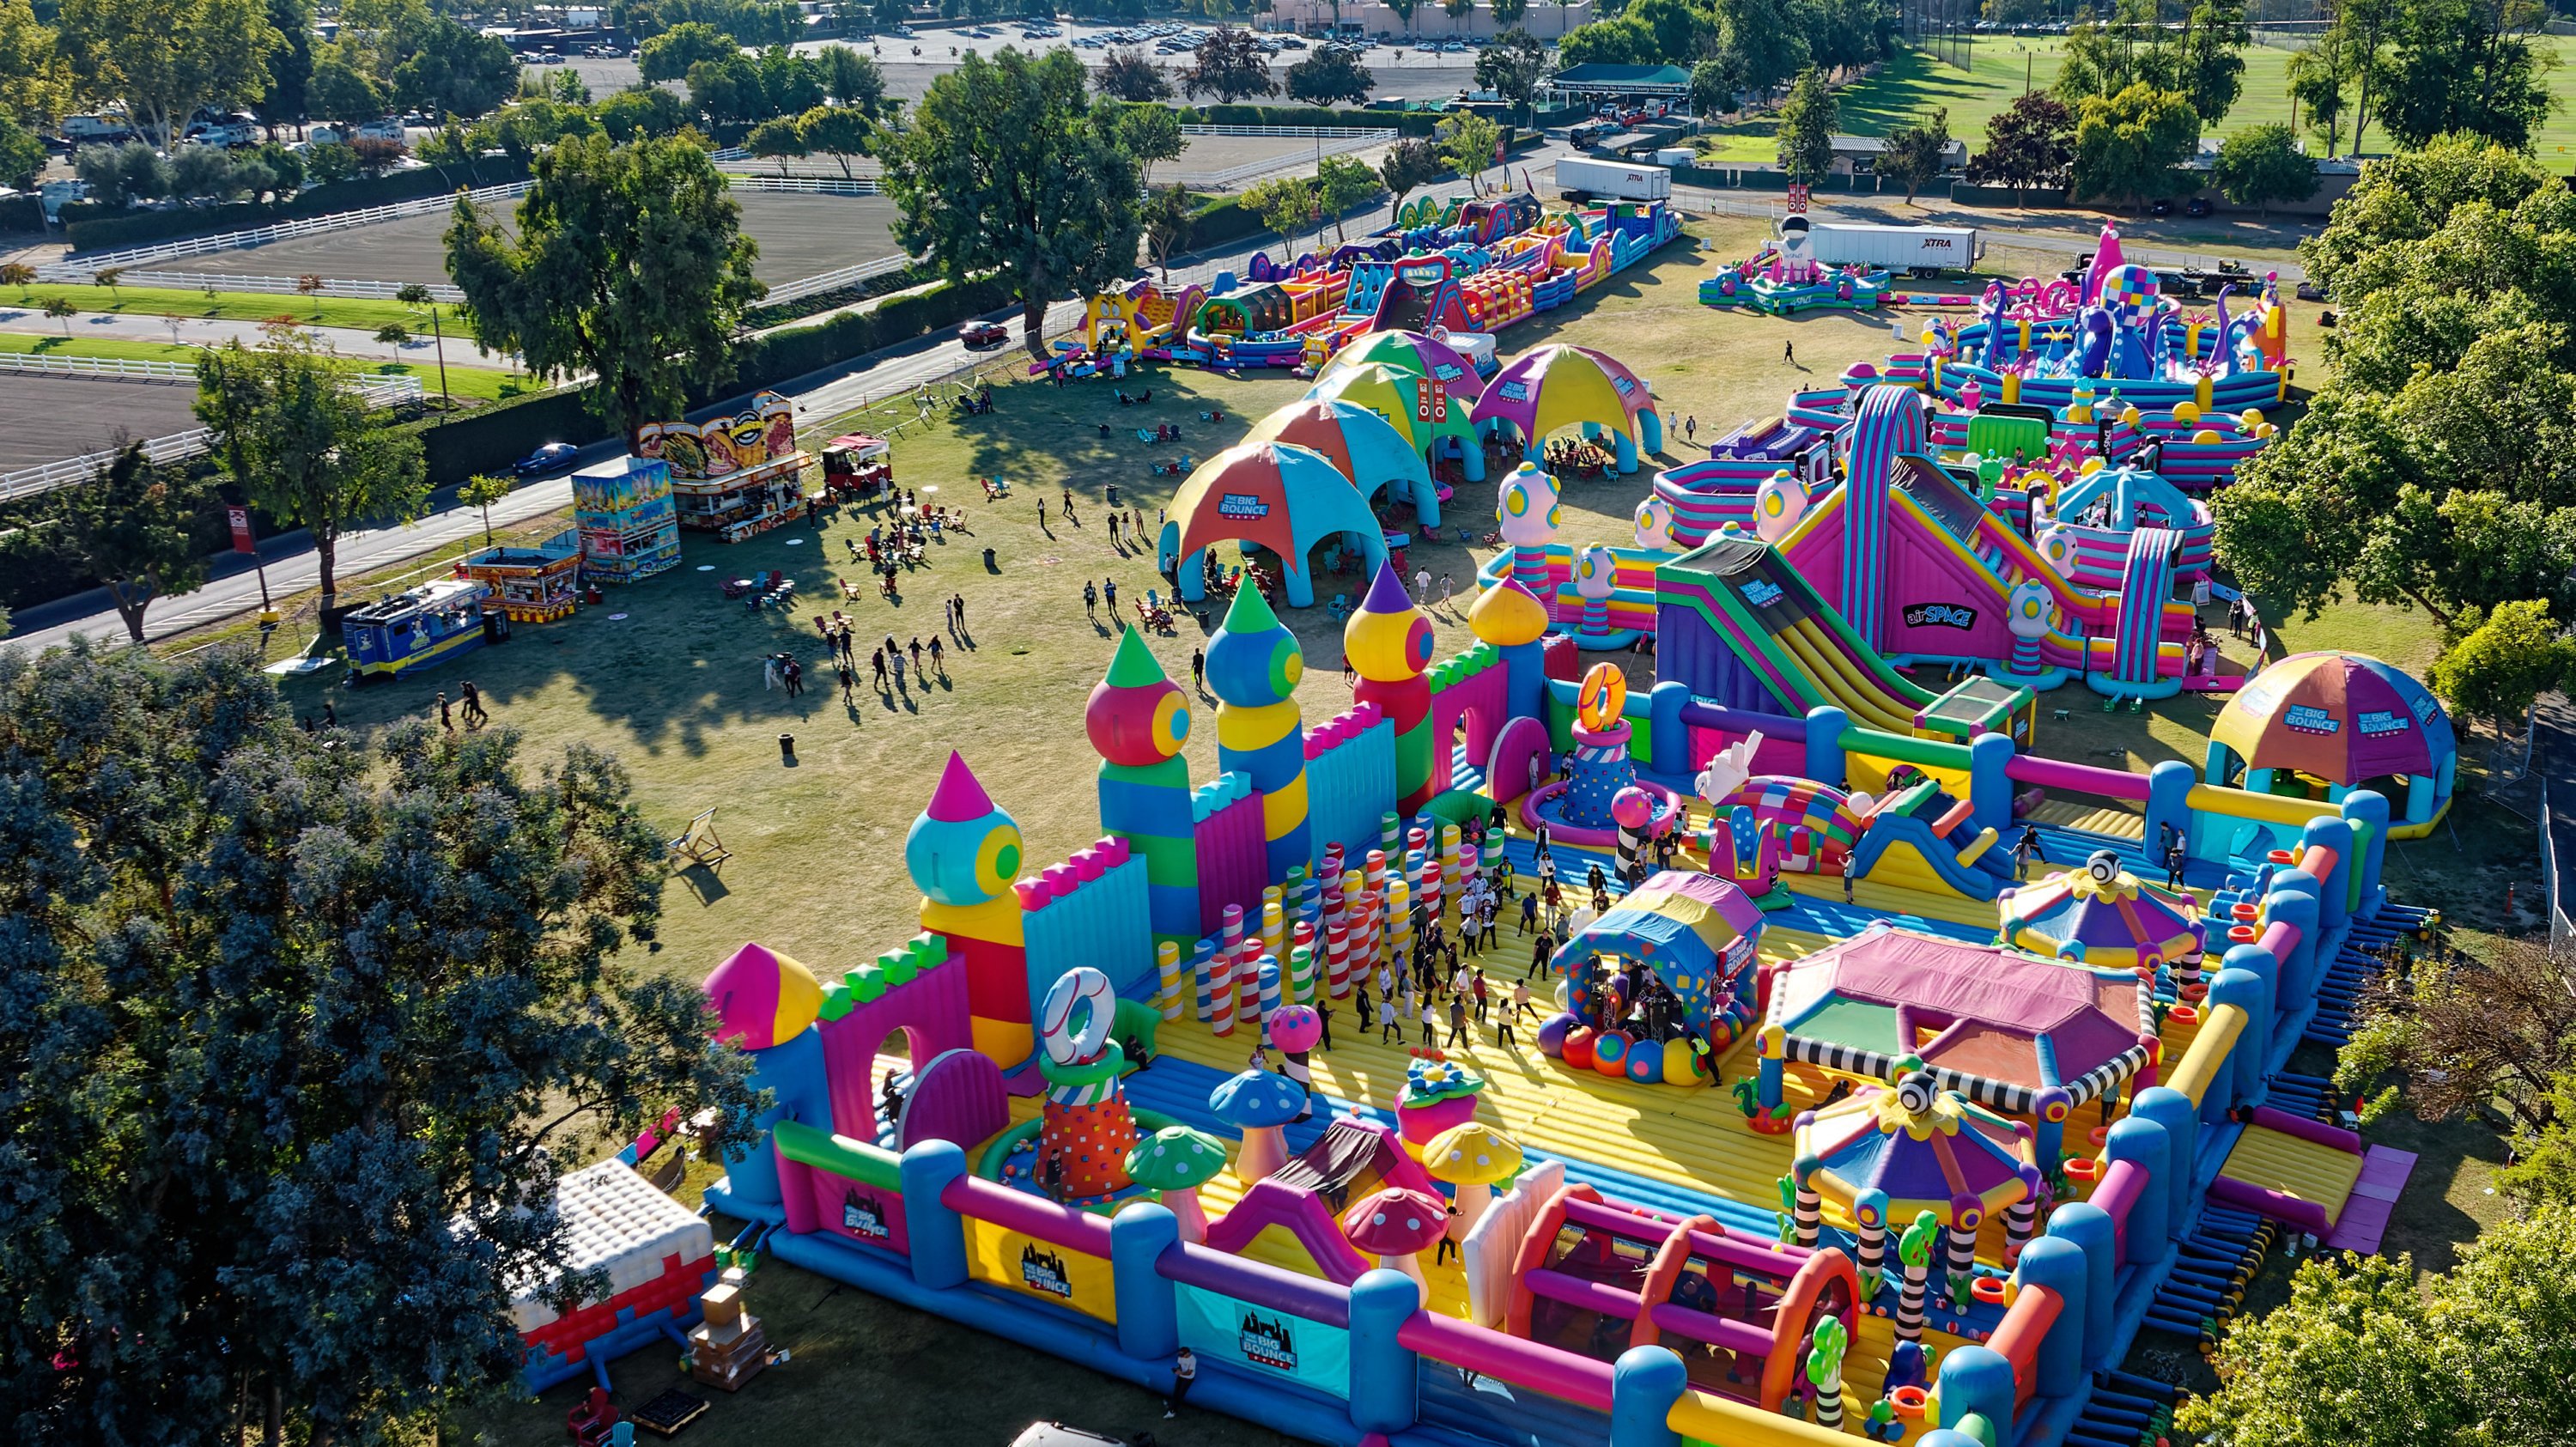 The Biggest Bounce House in the World is Coming back to DC this May